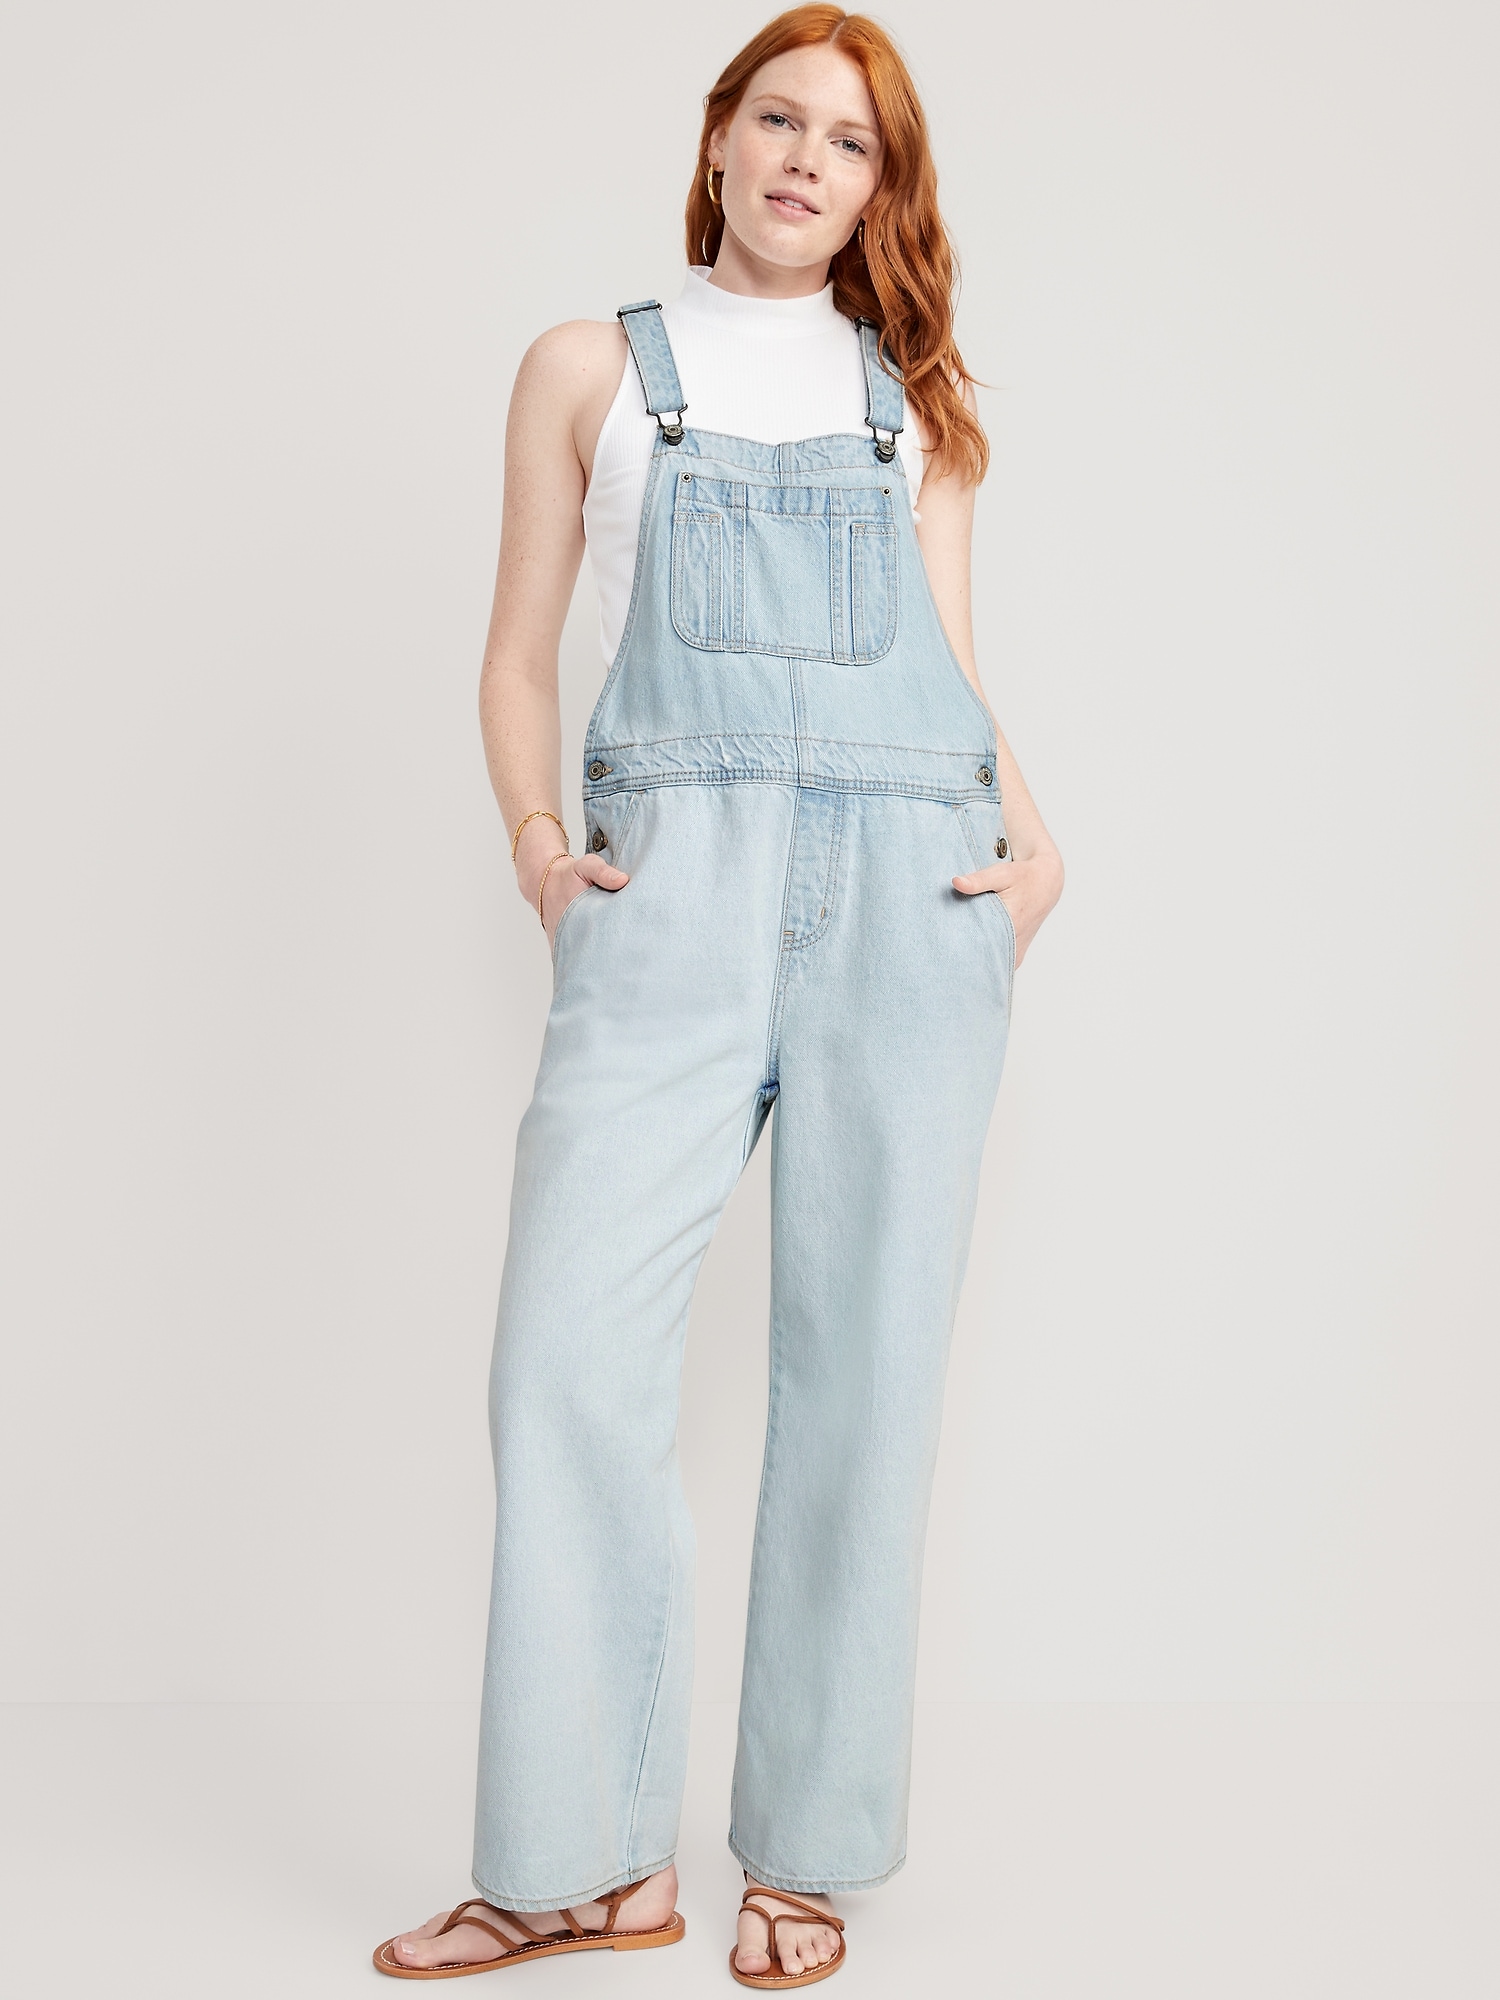 Old Navy Baggy Wide-Leg Non-Stretch Jean Overalls for Women blue. 1